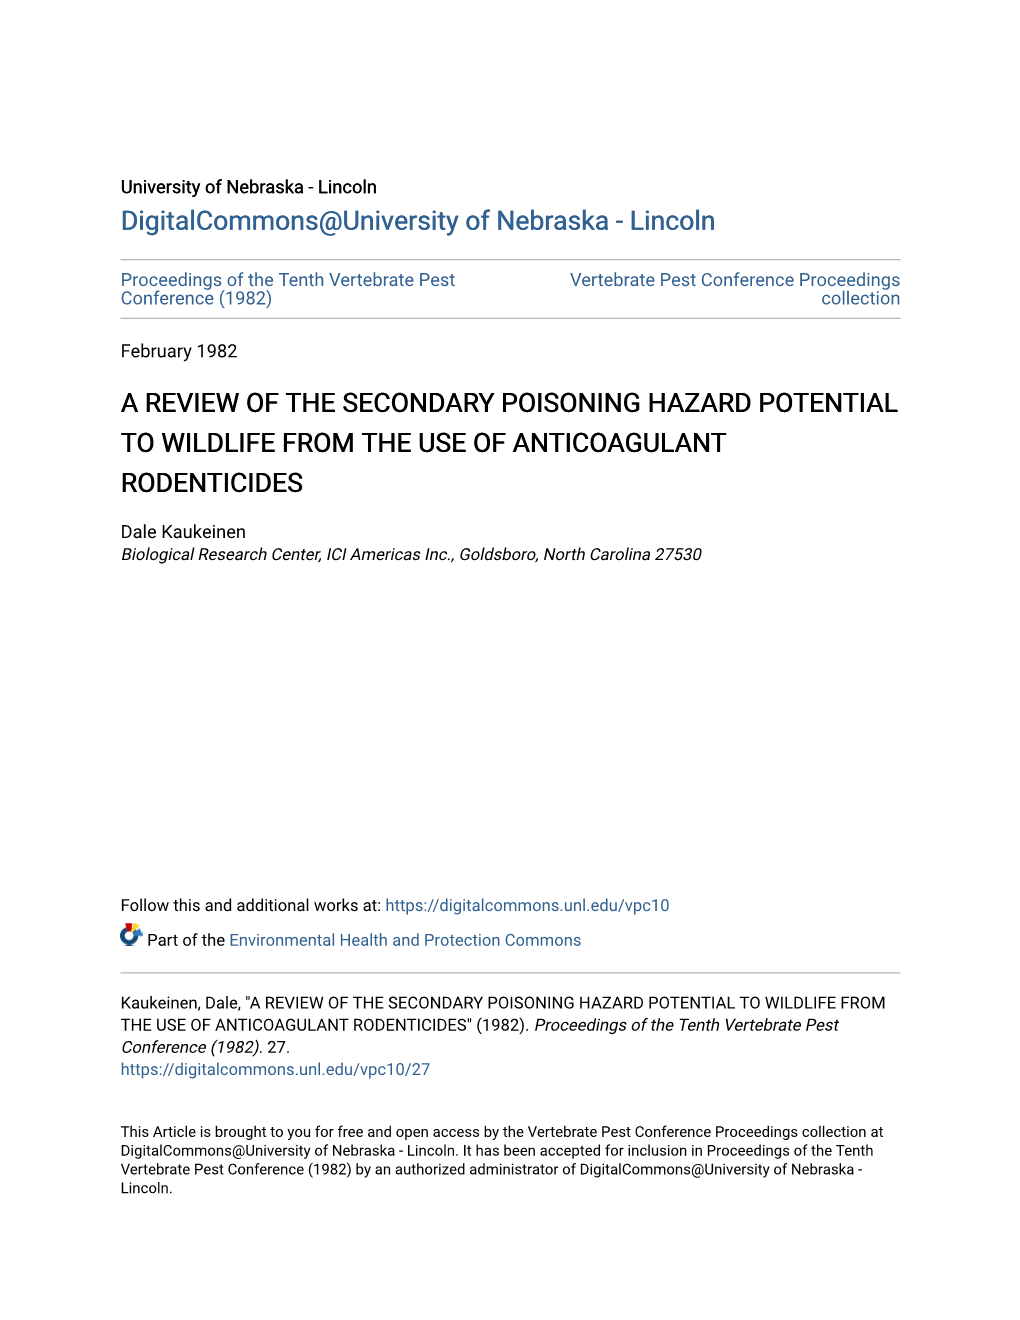 A Review of the Secondary Poisoning Hazard Potential to Wildlife from the Use of Anticoagulant Rodenticides